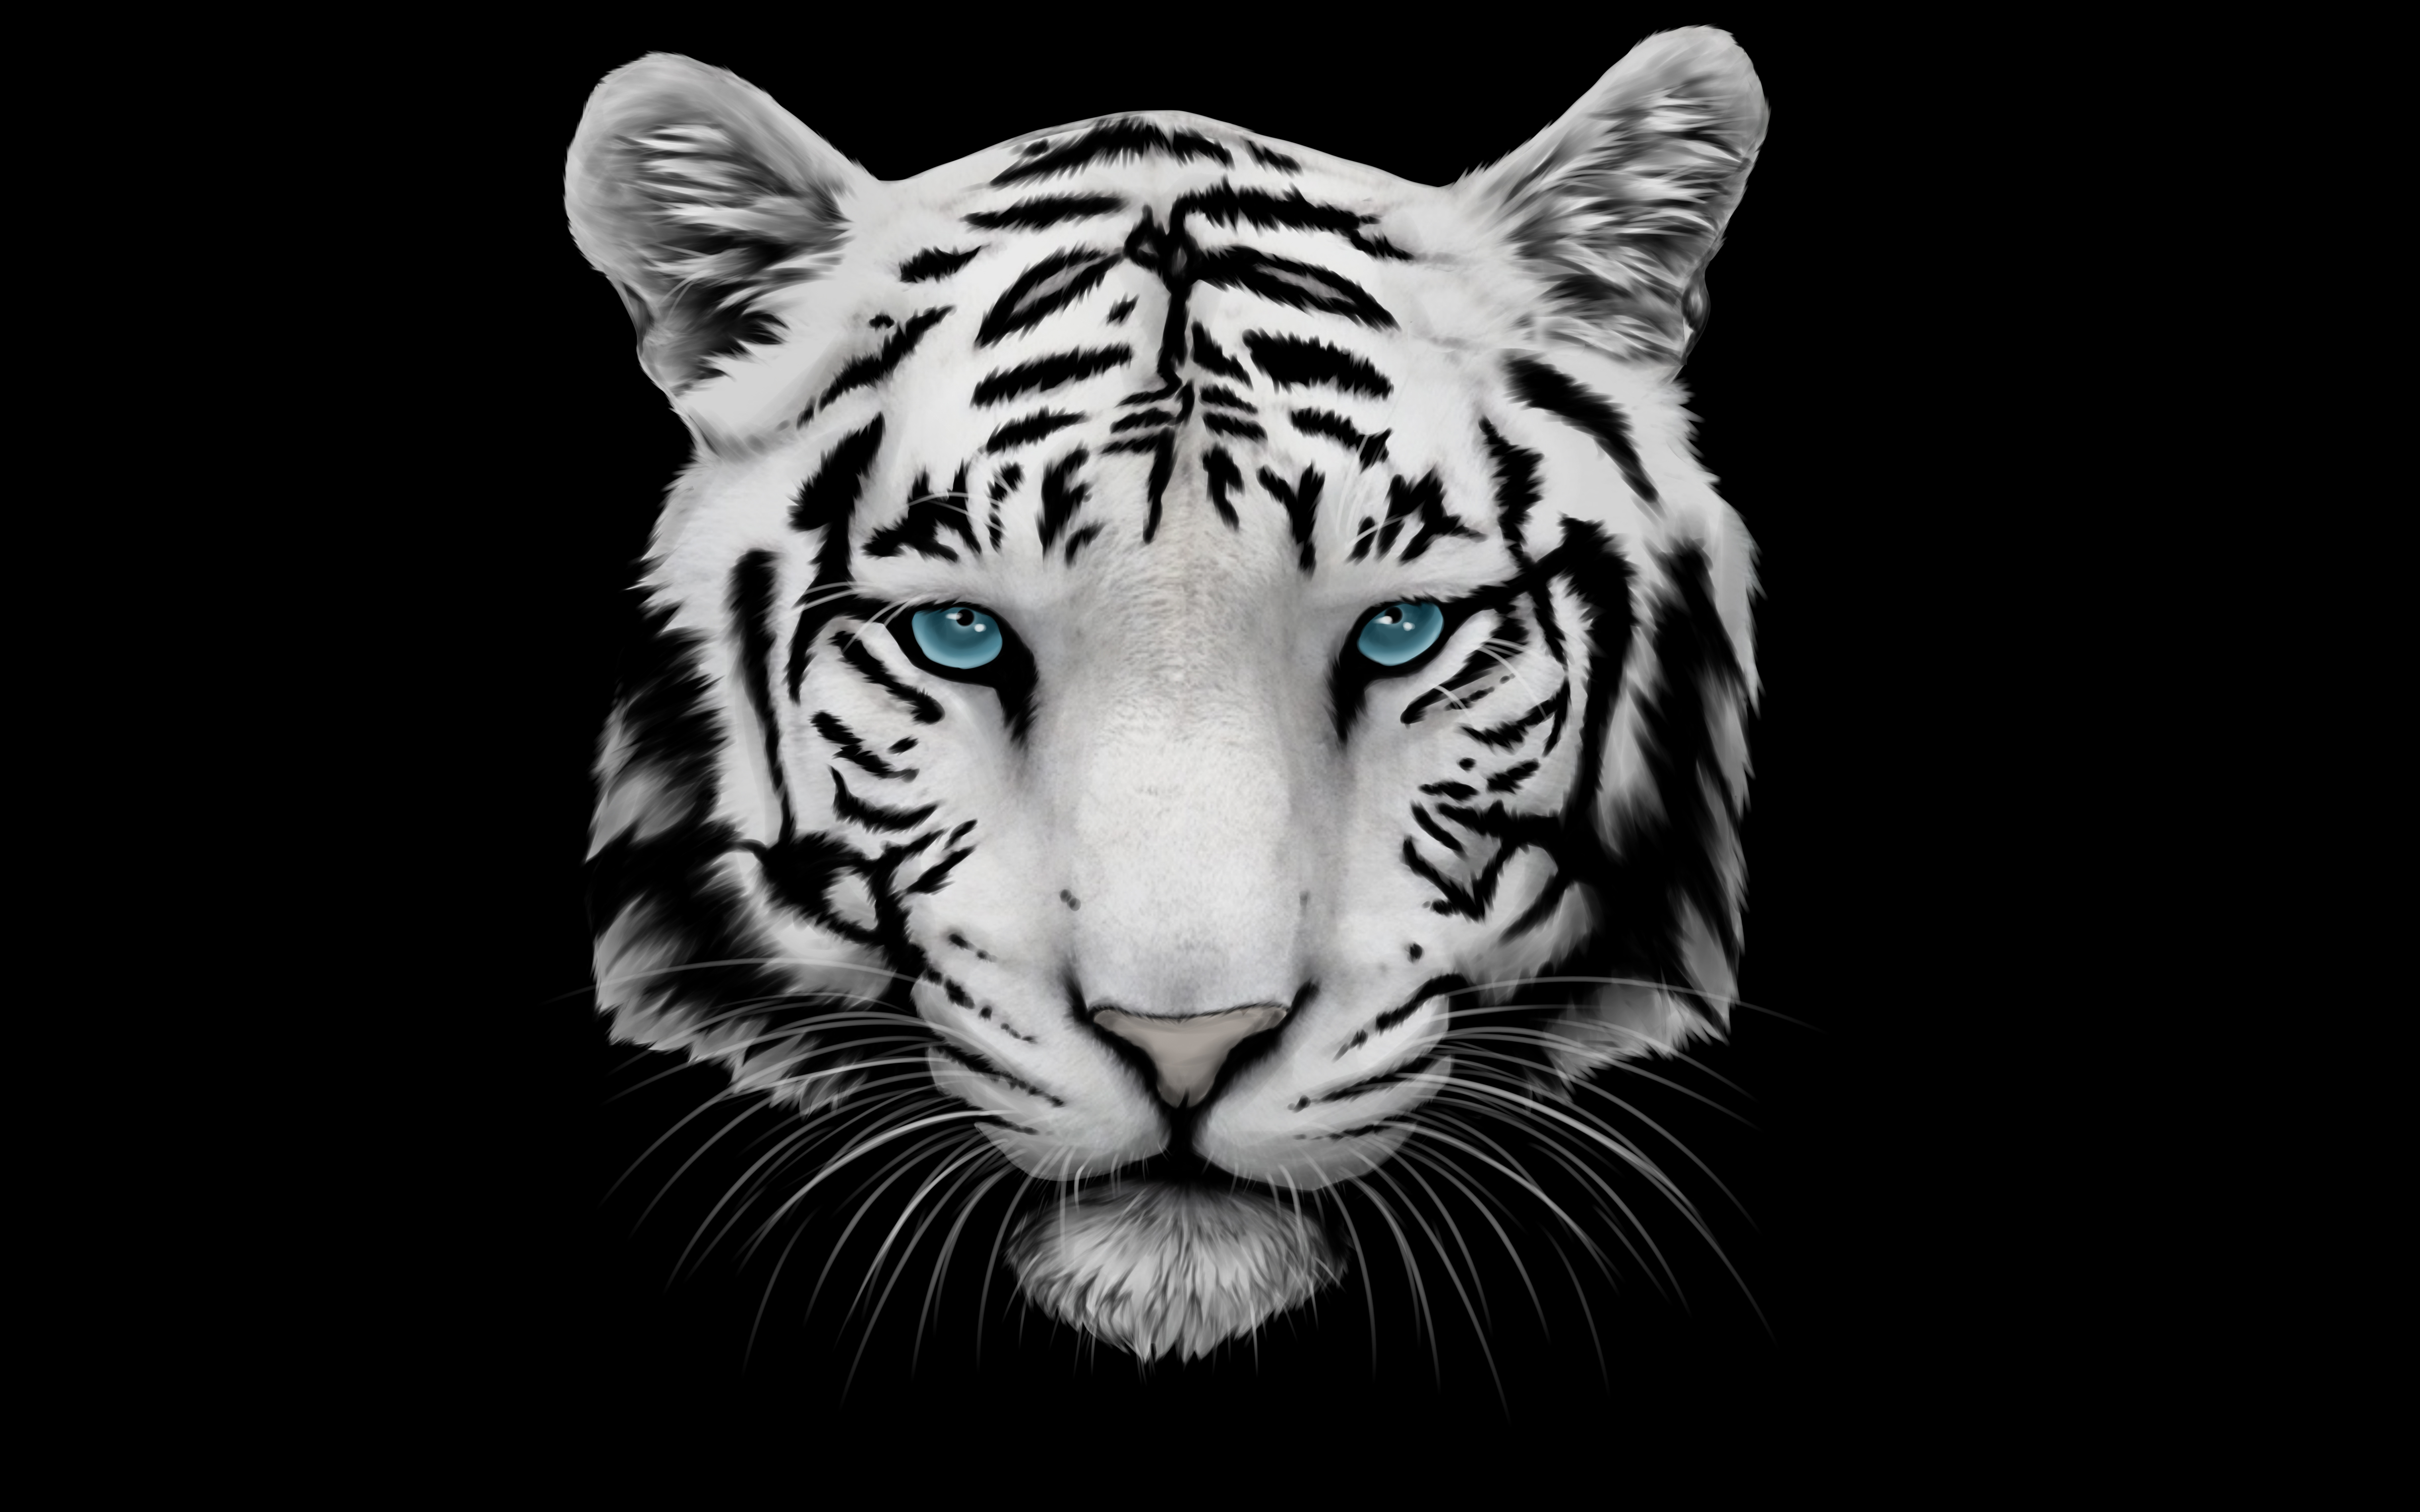 White Tiger Wallpaper Image Photos Pictures Background